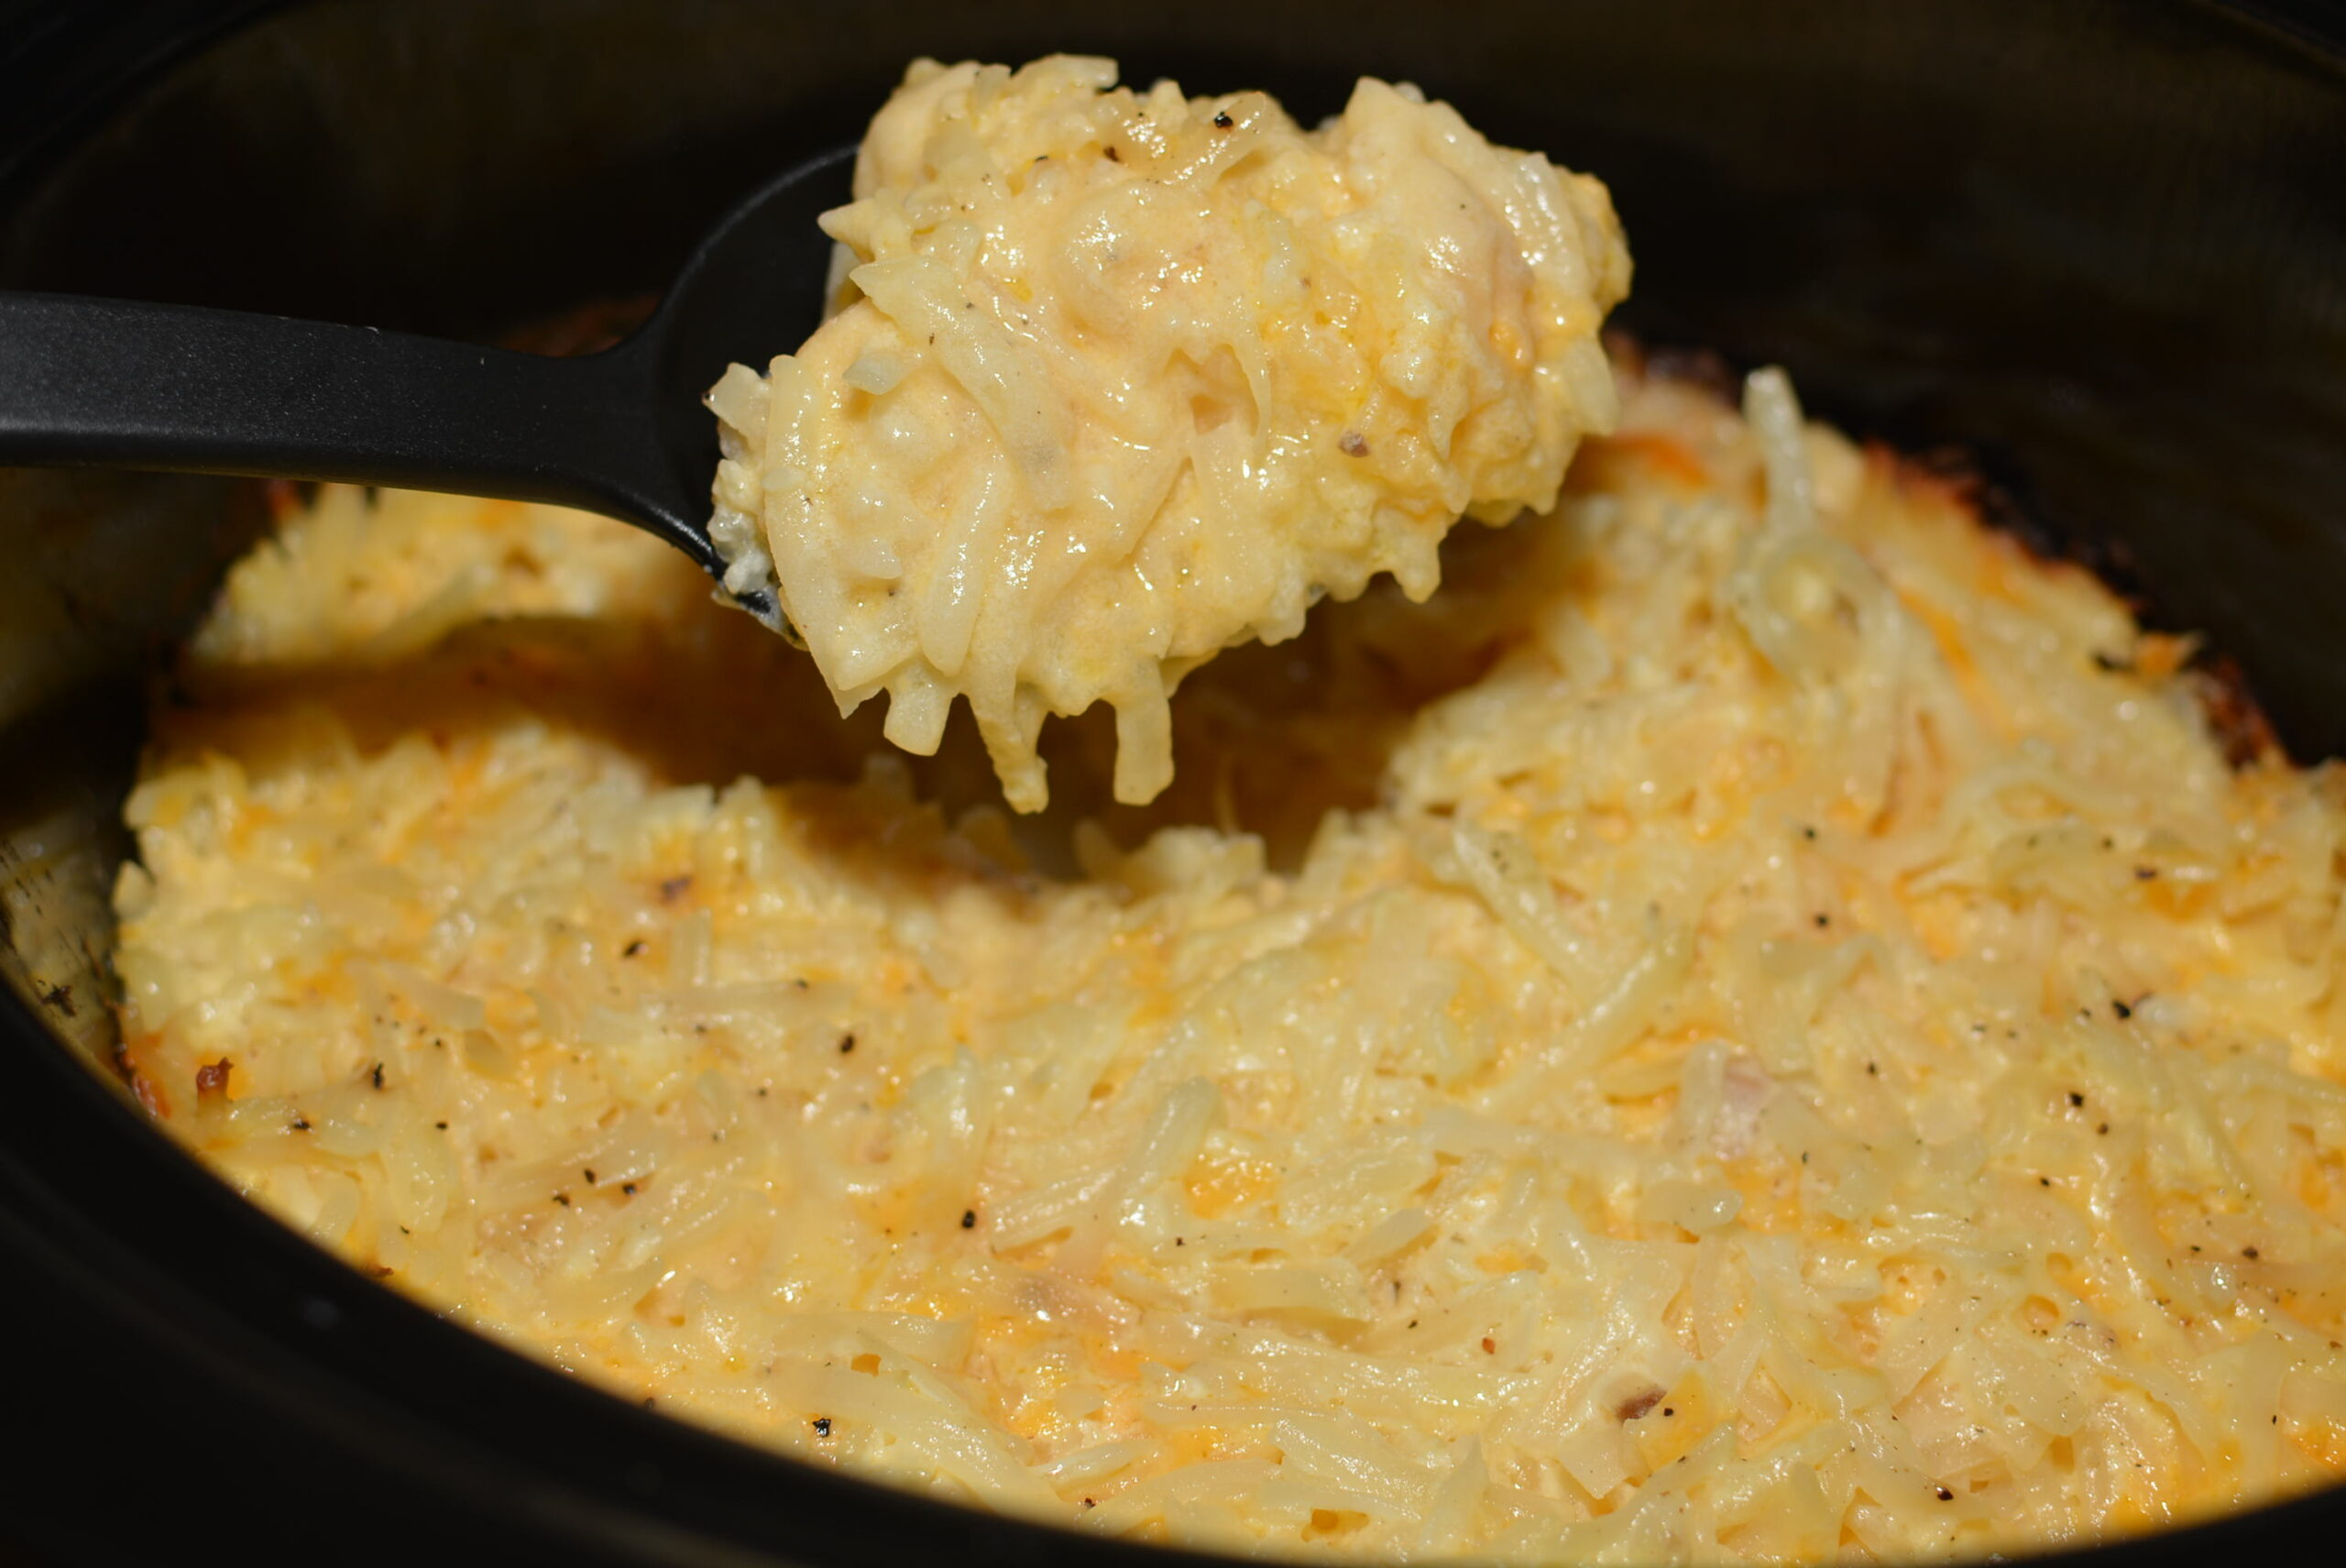 Cheesy Hashbrown Casserole in the Slow Cooker!